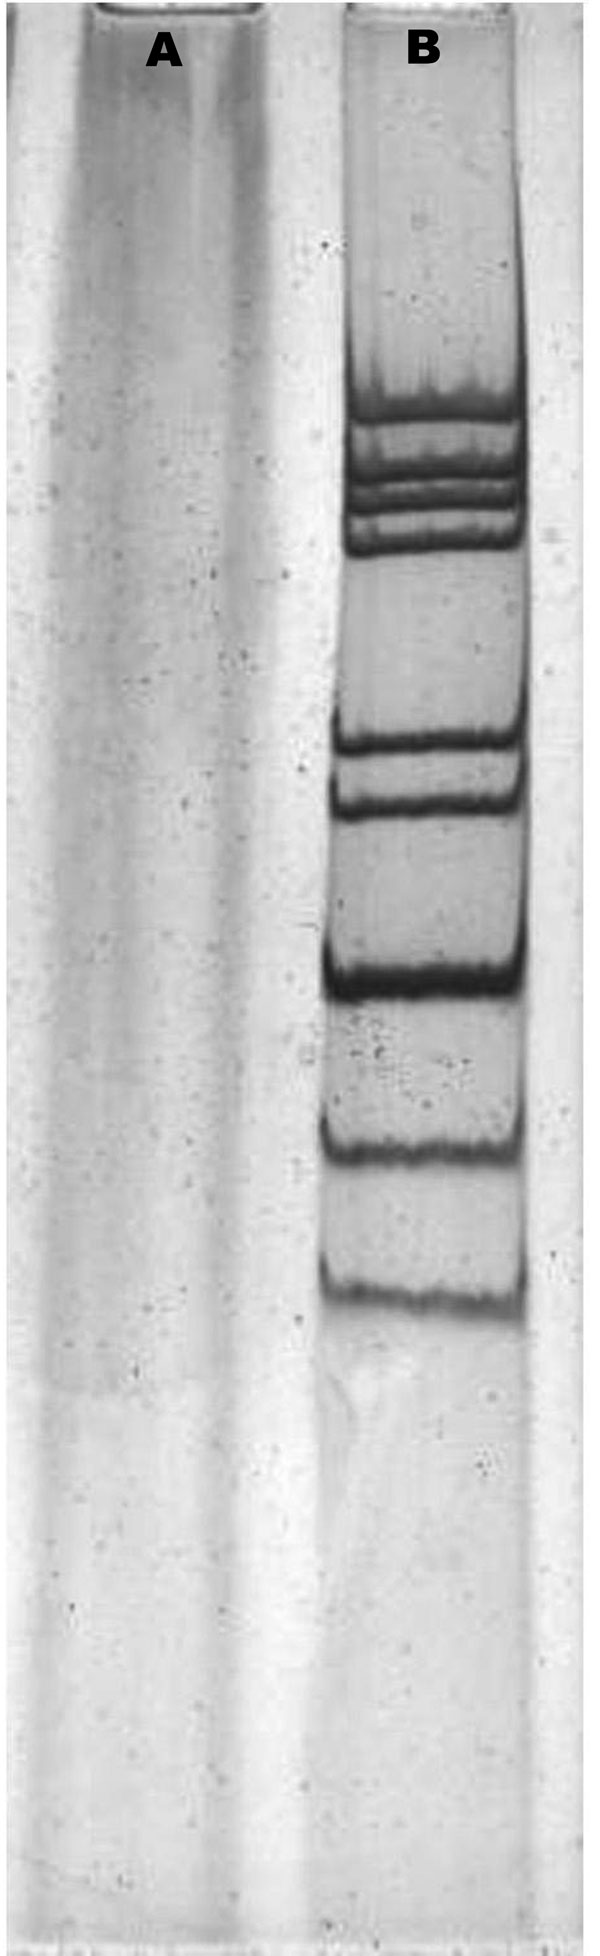 Polyacrylamide gel electrophoresis of rotavirus RNA. The viral RNAs were analyzed by electrophoresis in a polyacrylamide gel and visualized by silver staining. A, negative control; B, Wuhan G9 strain (CC589).